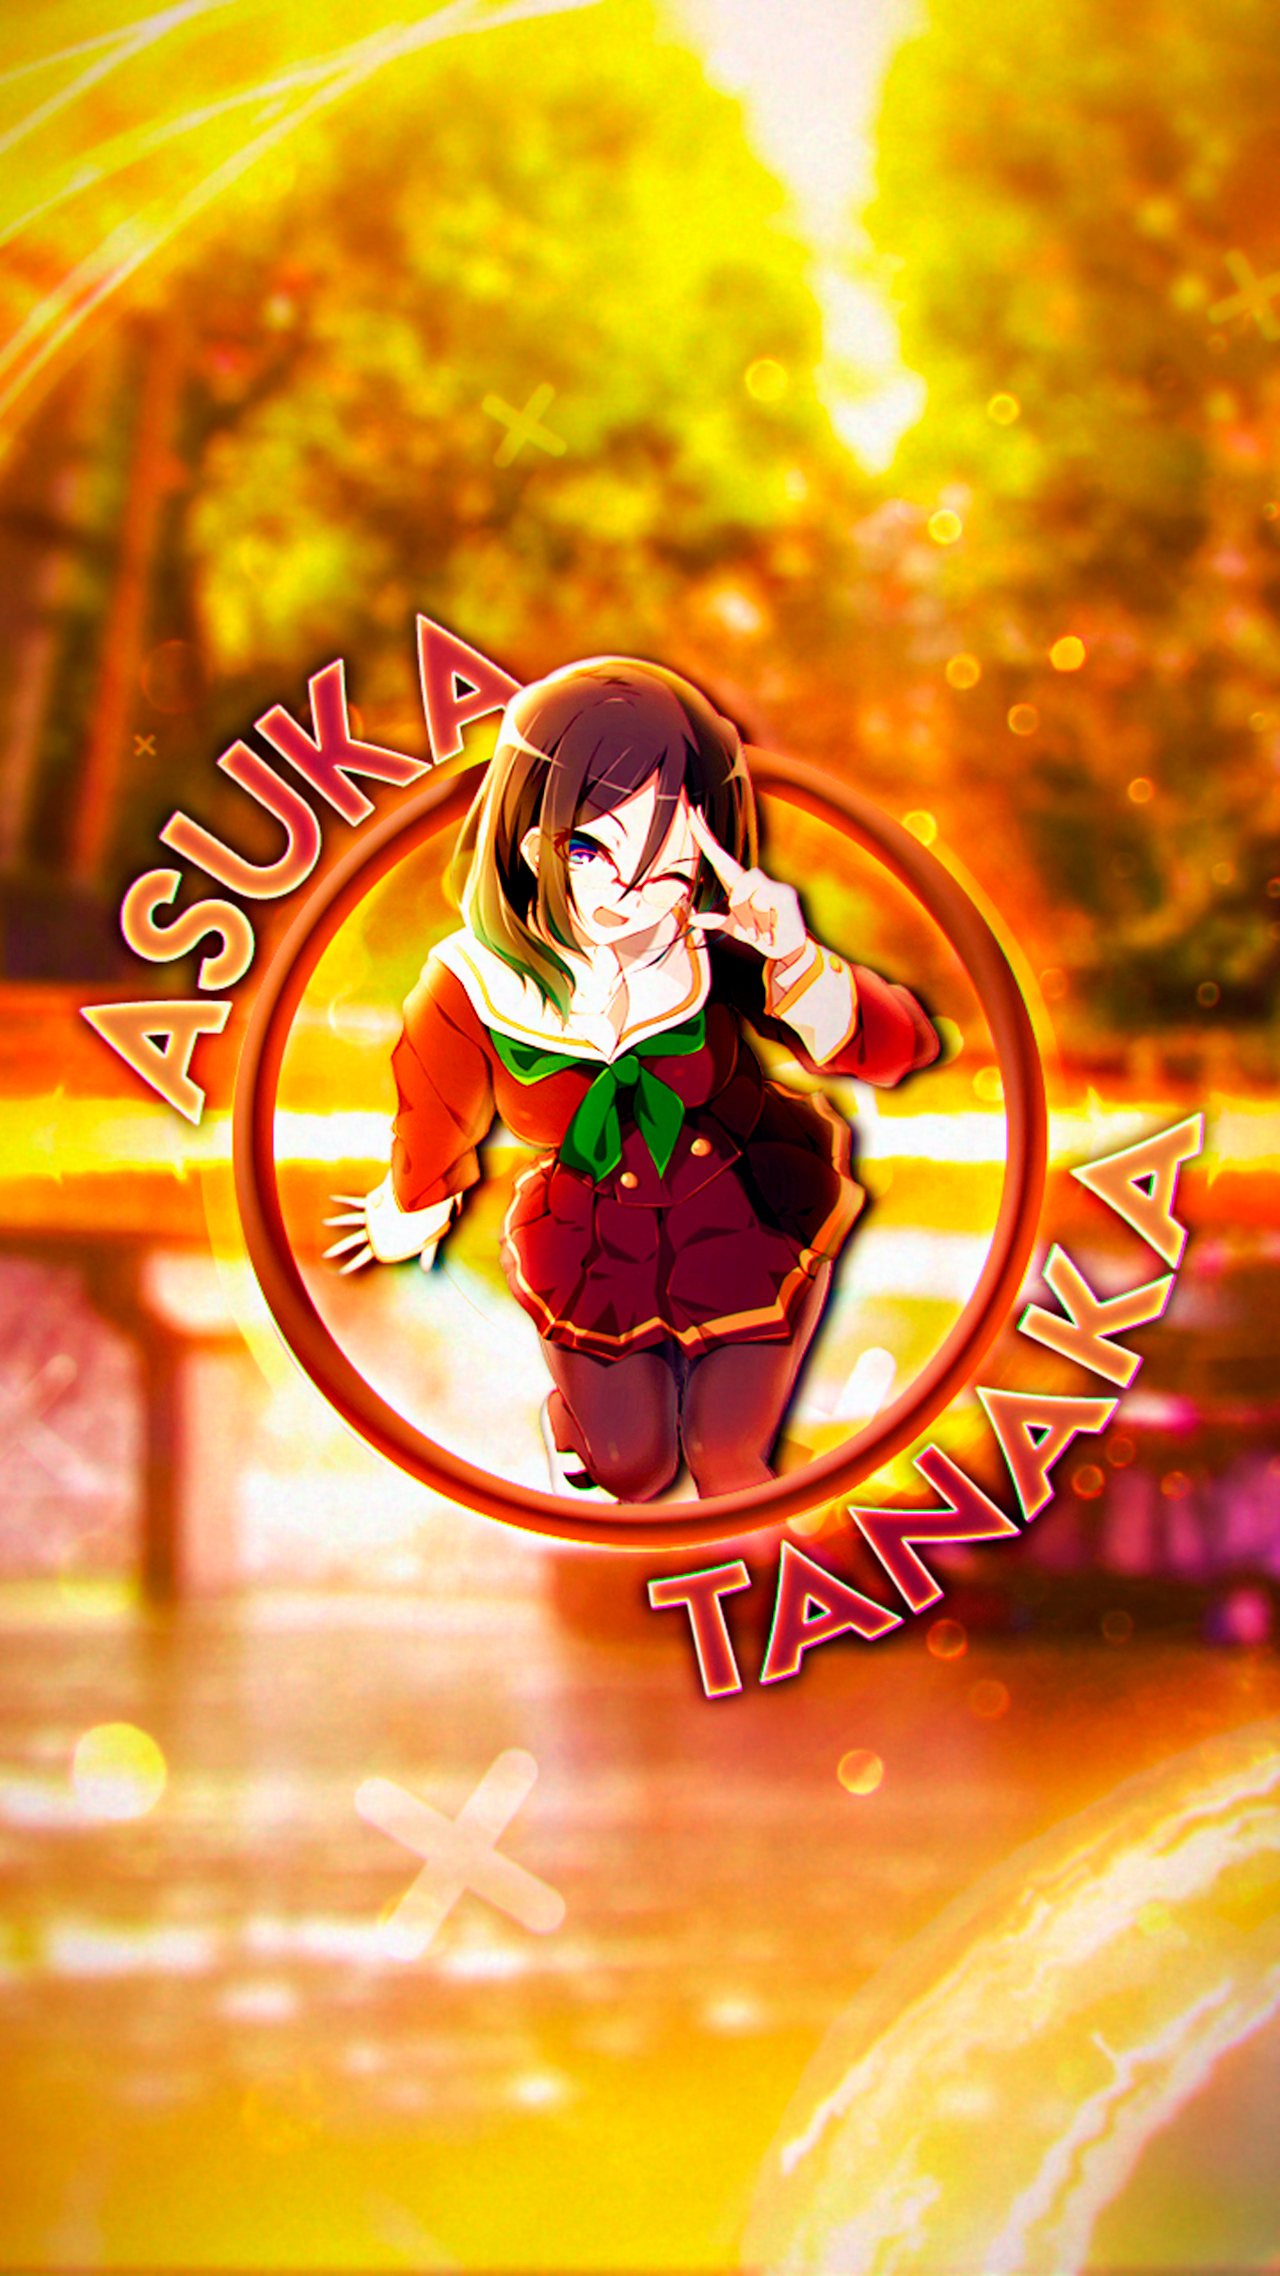 Tanaka Asuka Hibike Euphonium Anime Girls Picture In Picture Portrait Display Glasses Looking At Vie 1280x2276